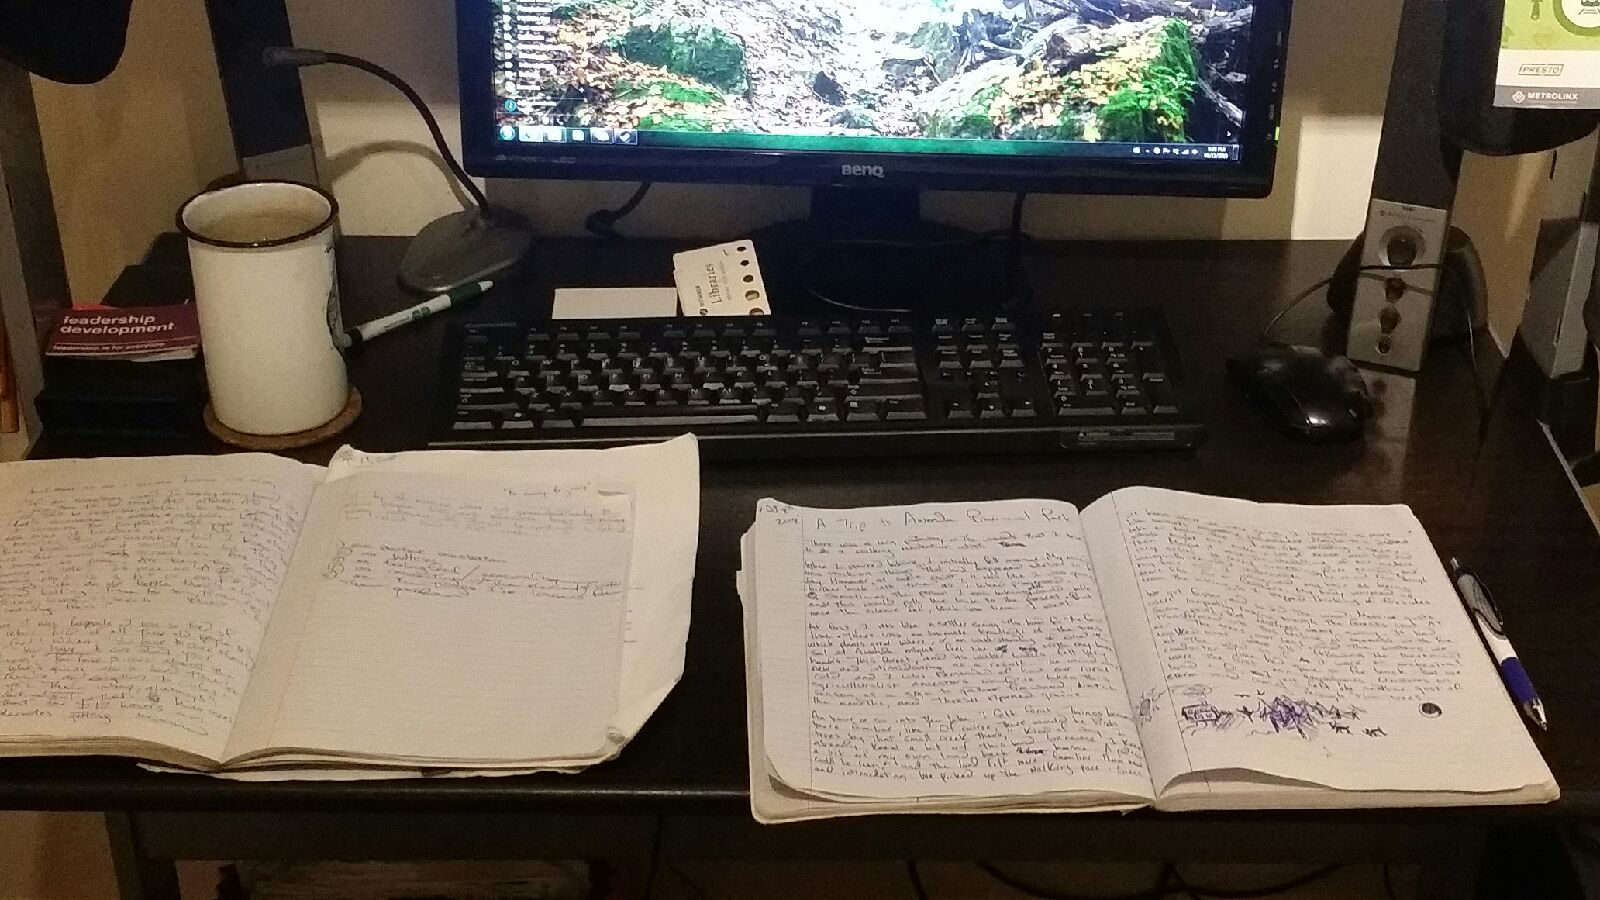 Two notebooks open simultaneously. Caption: Two notebooks at once? We party hard here